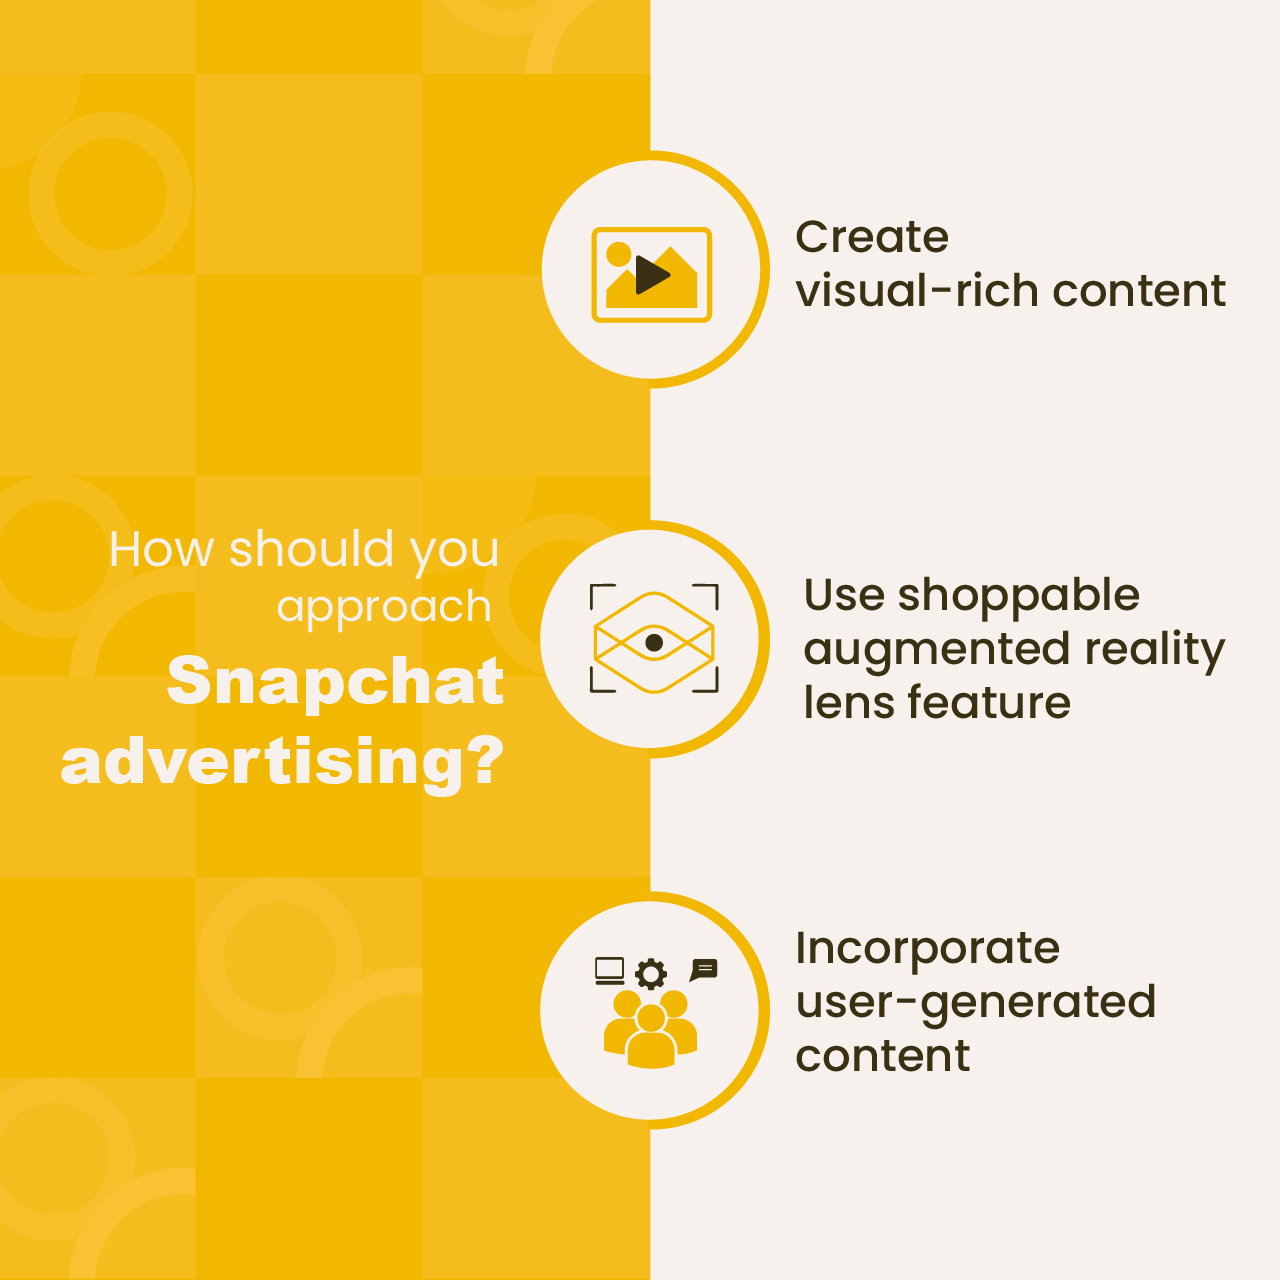 Snapchat advertising best practices